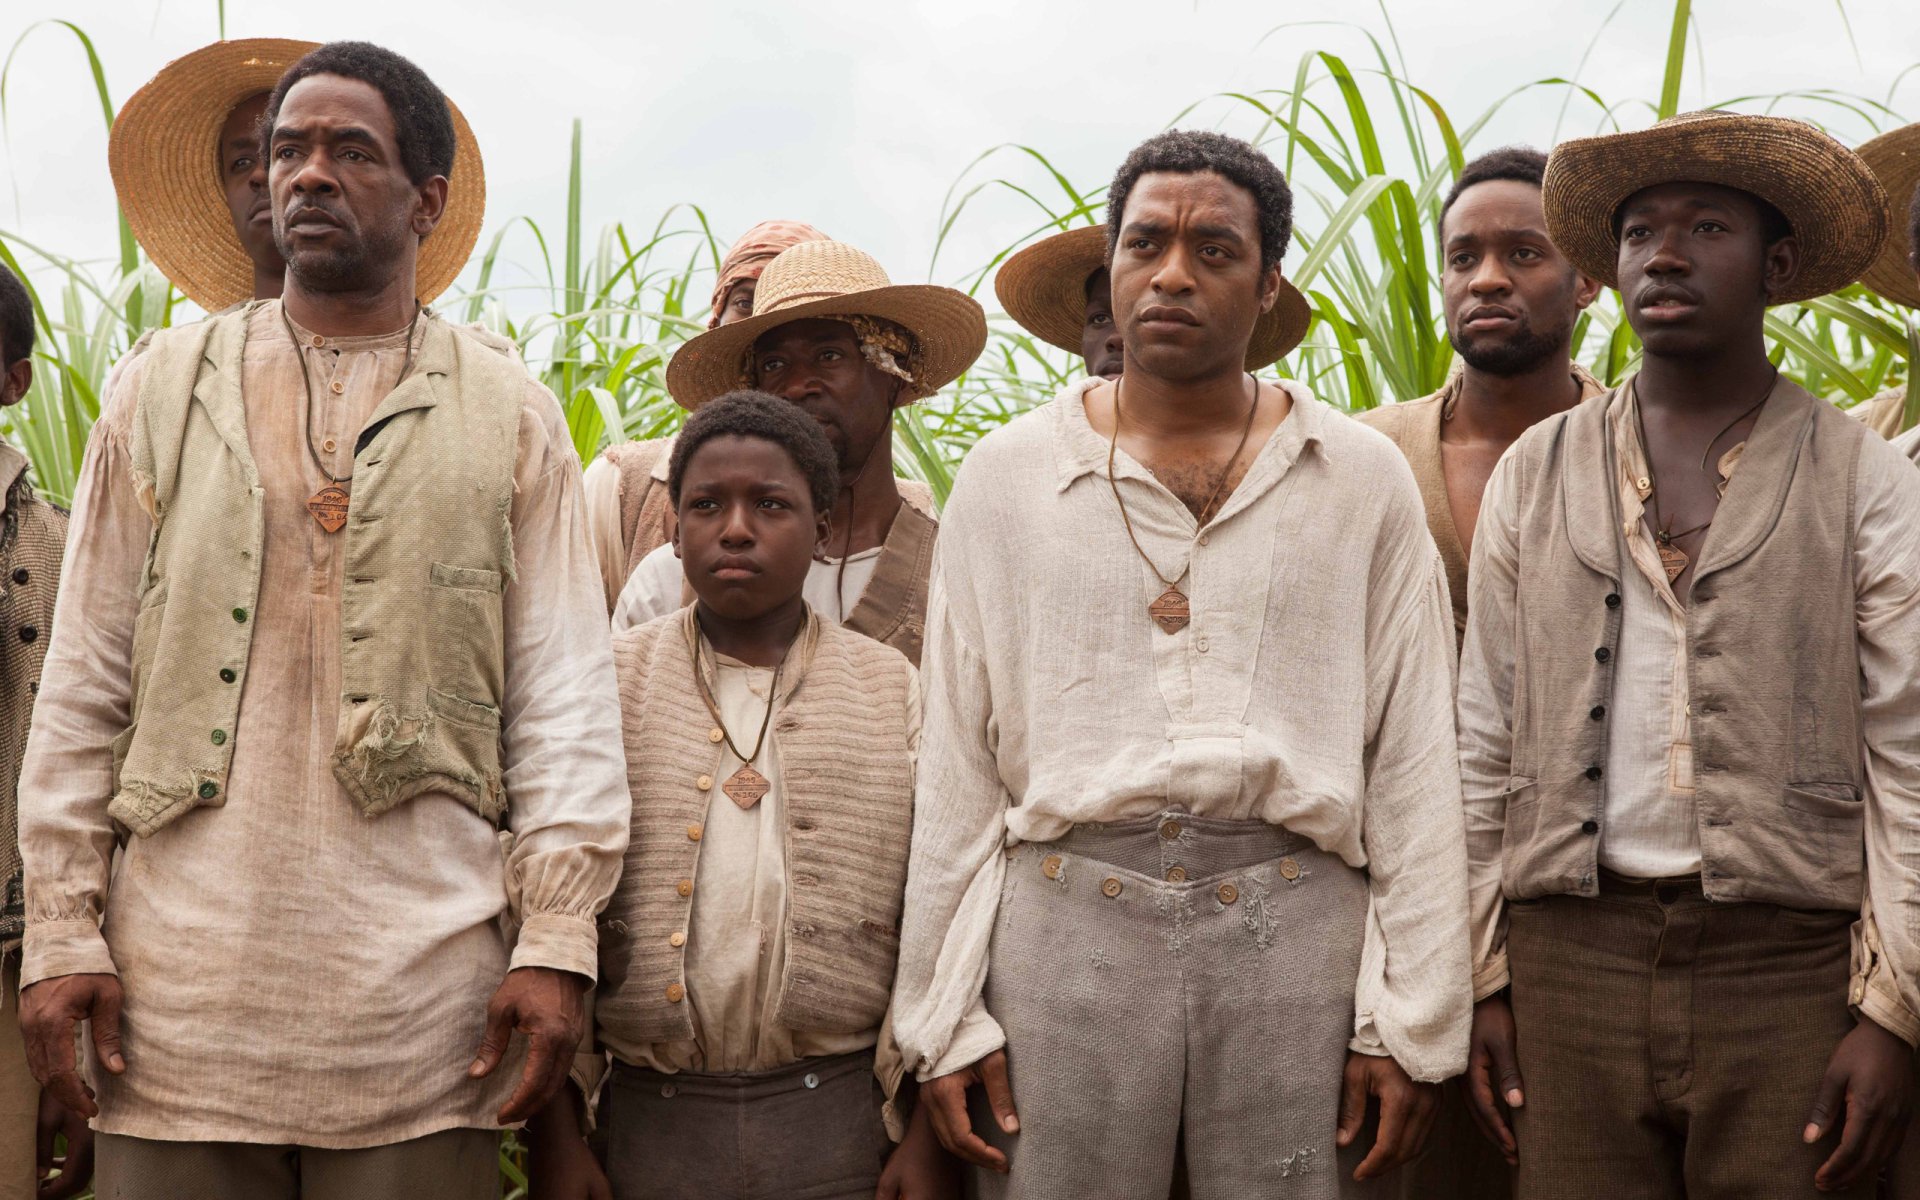 Download Chiwetel Ejiofor Movie 12 Years A Slave  HD Wallpaper